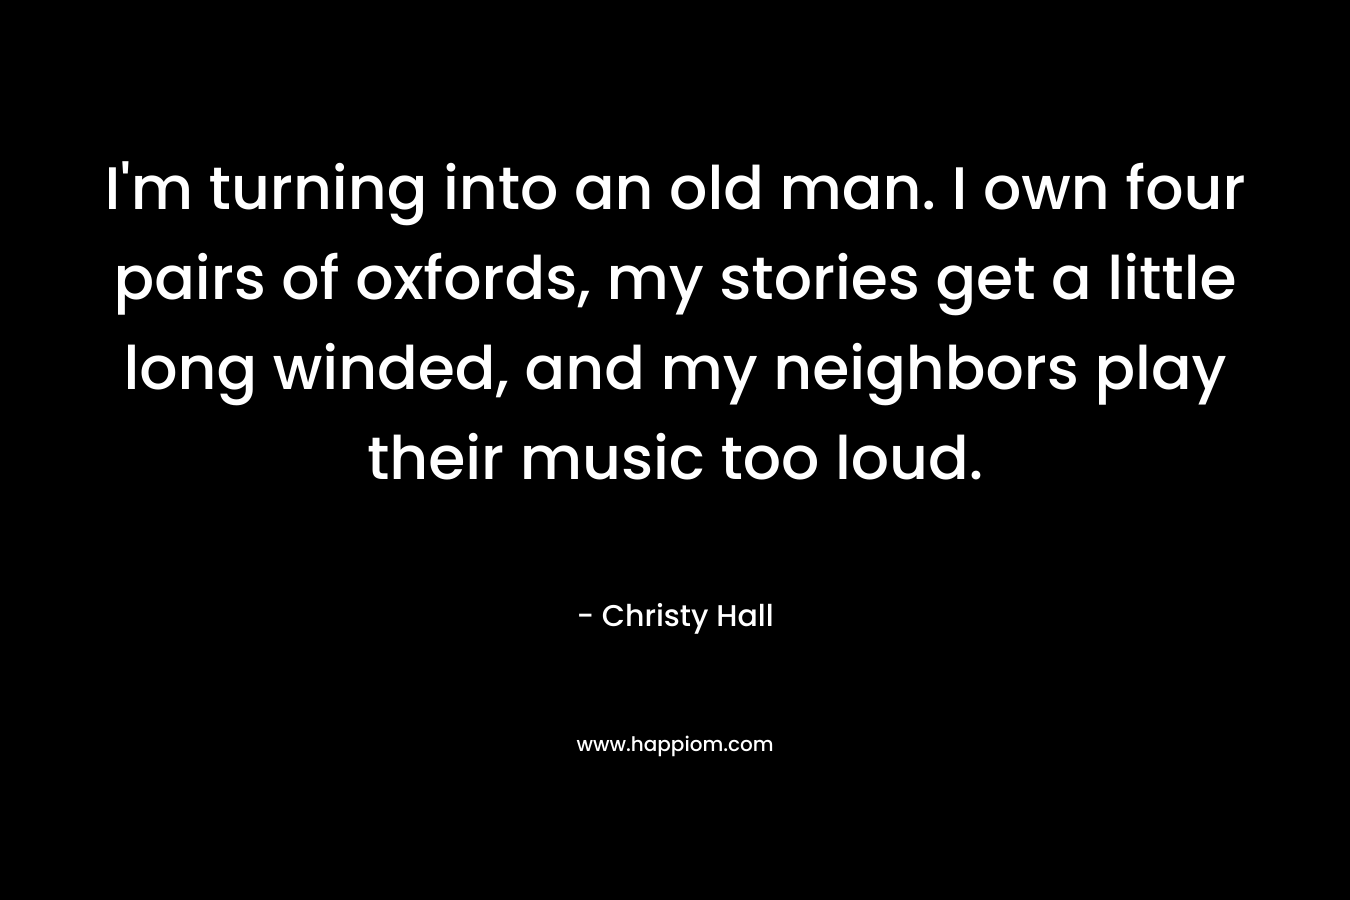 I’m turning into an old man. I own four pairs of oxfords, my stories get a little long winded, and my neighbors play their music too loud. – Christy  Hall